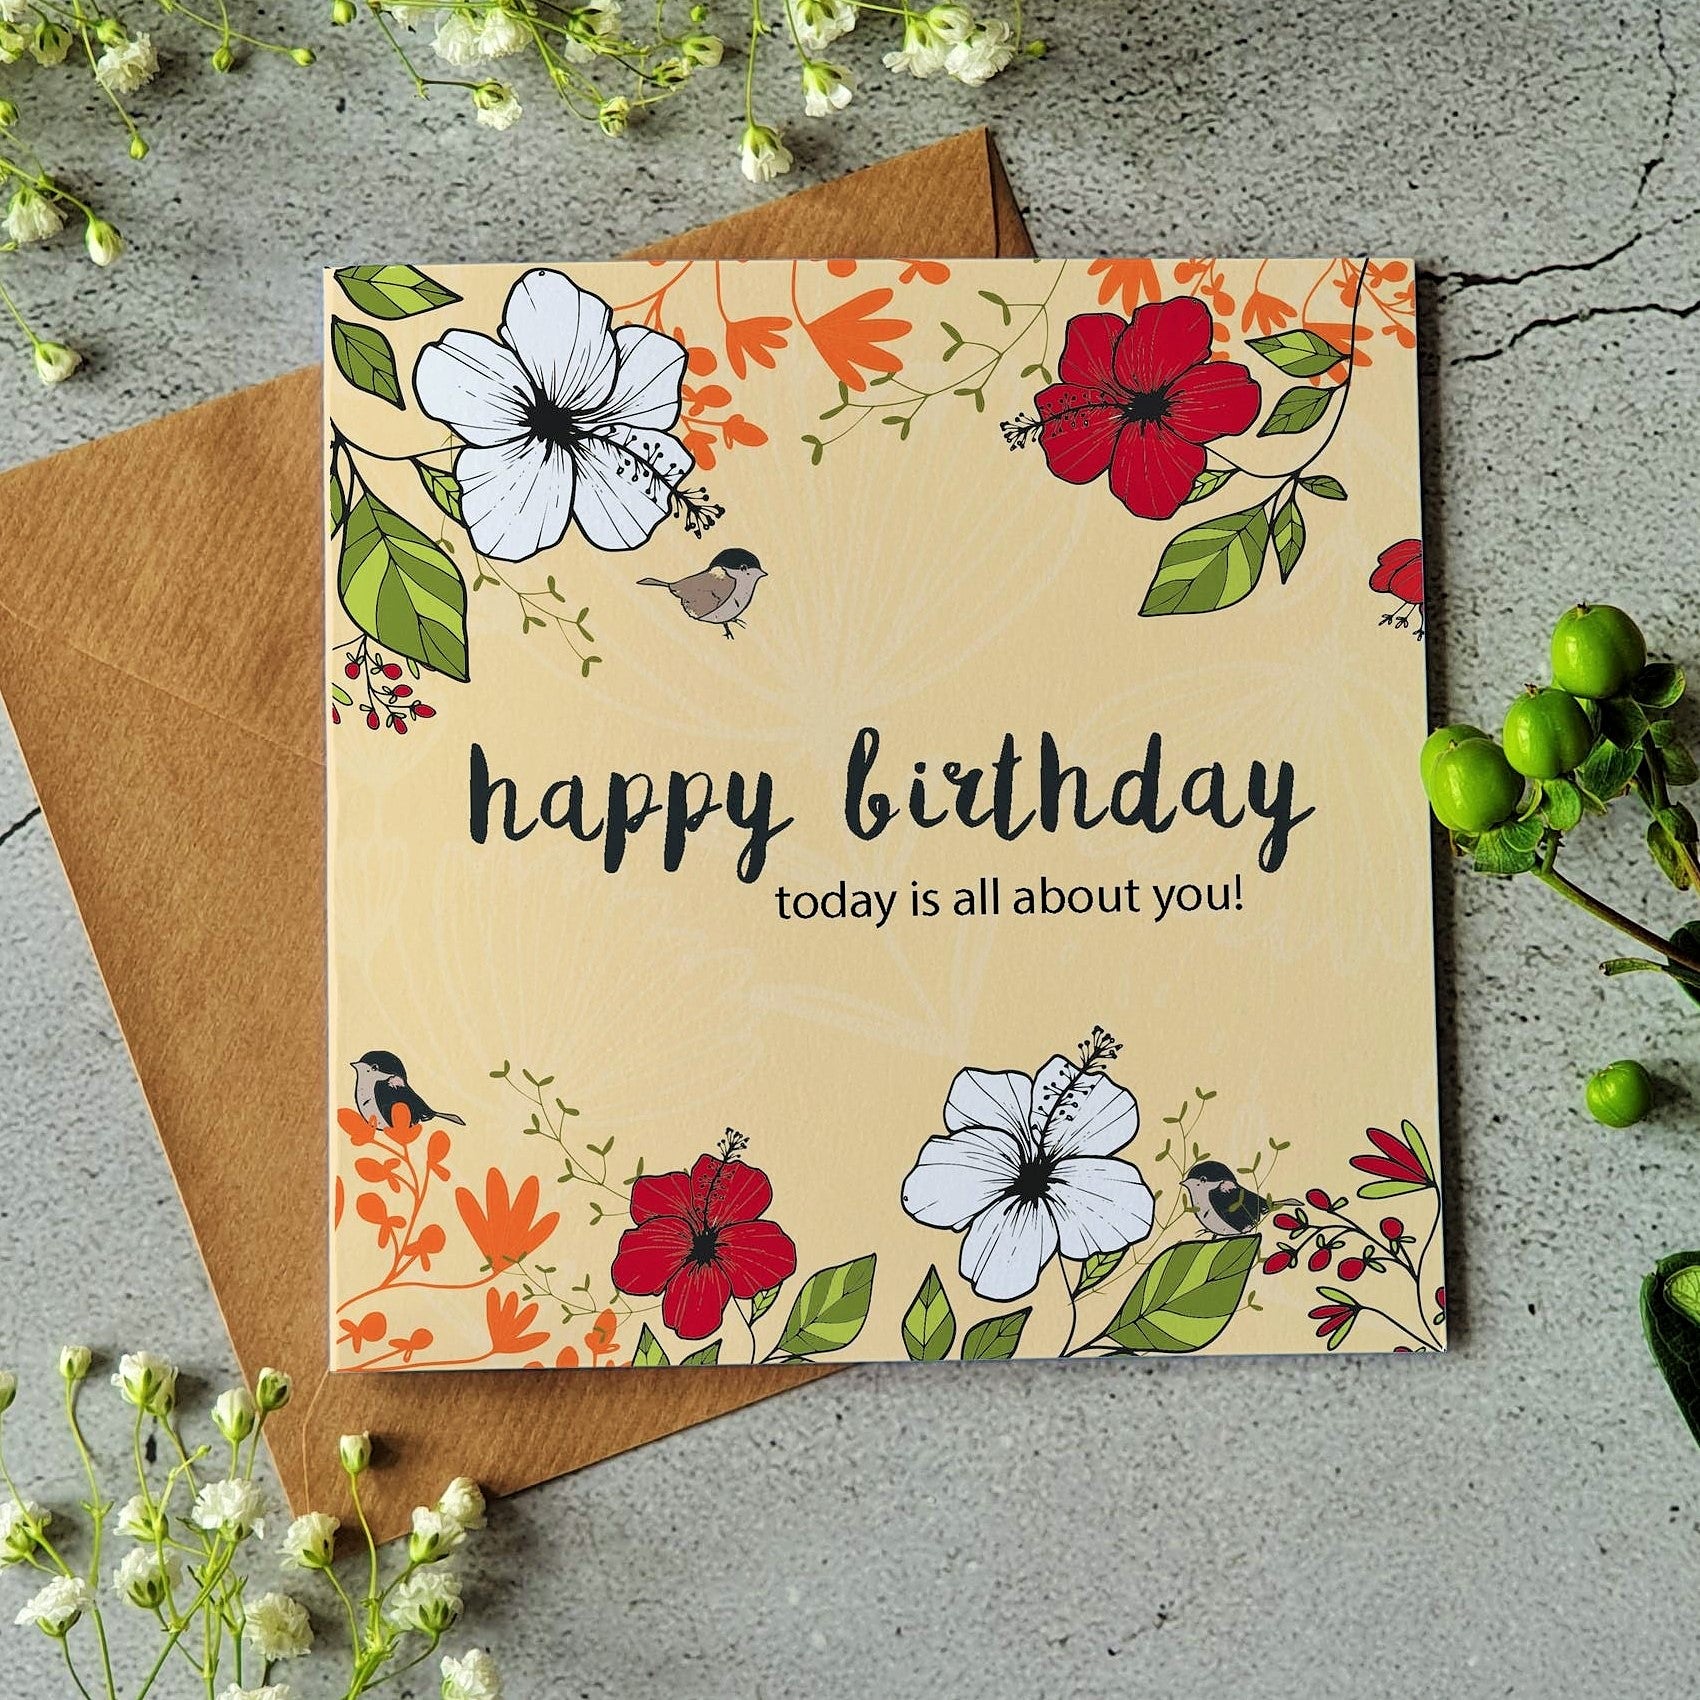 Floral Happy Birthday 'Today it's all about you' Cards designed by Ilana Ewing